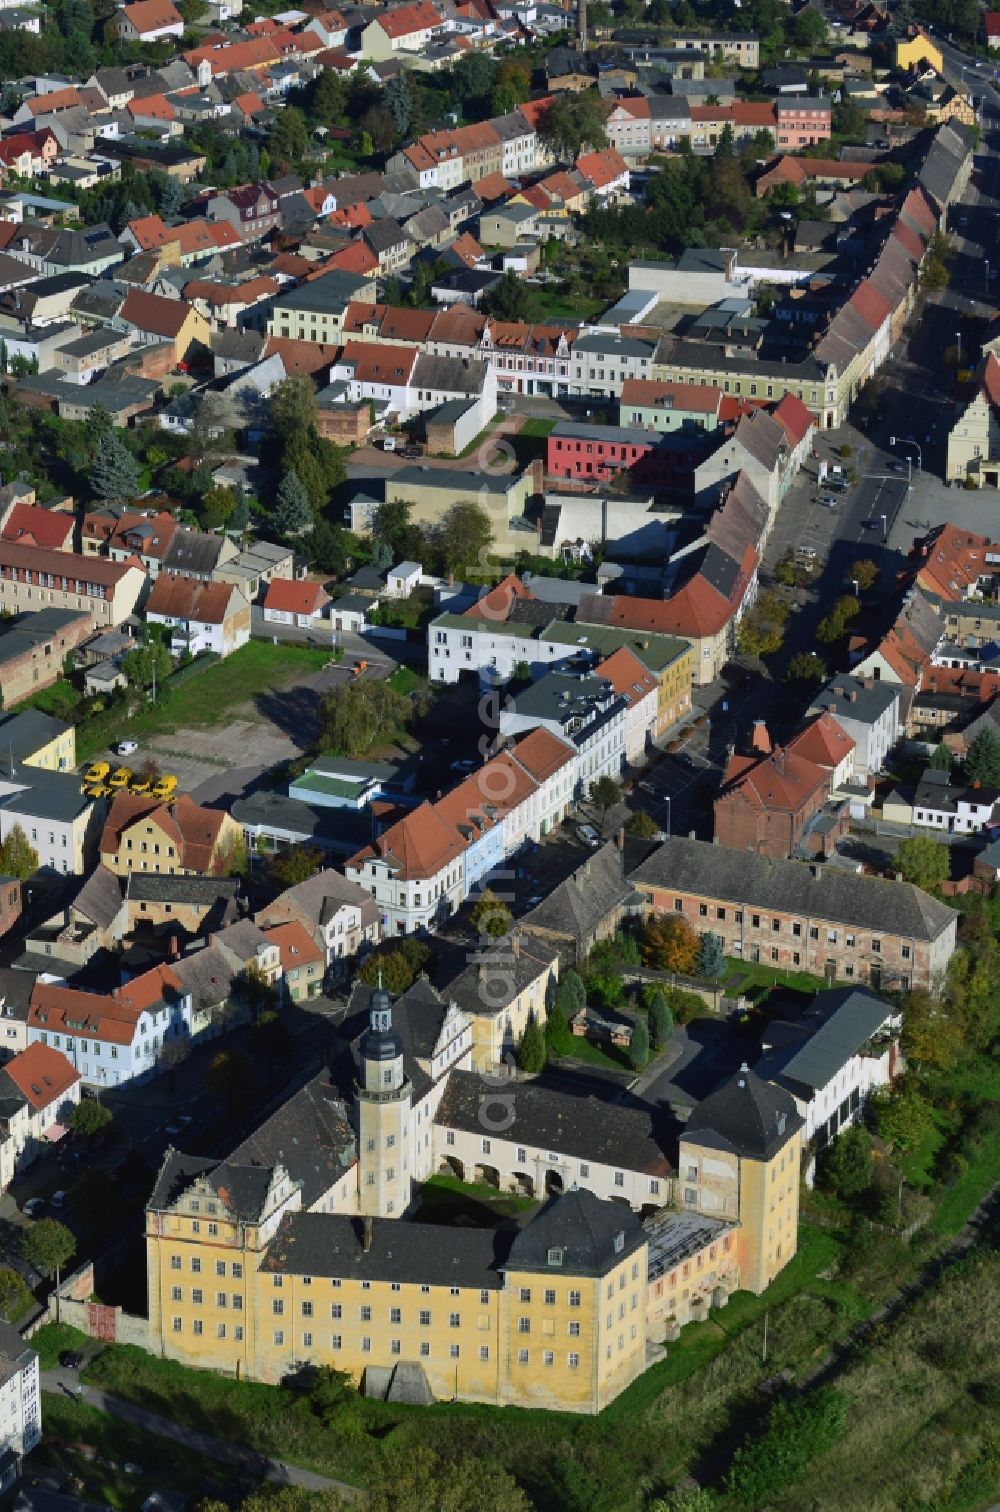 Coswig (Anhalt) from the bird's eye view: Castle in Coswig (Anhalt) in Saxony-Anhalt